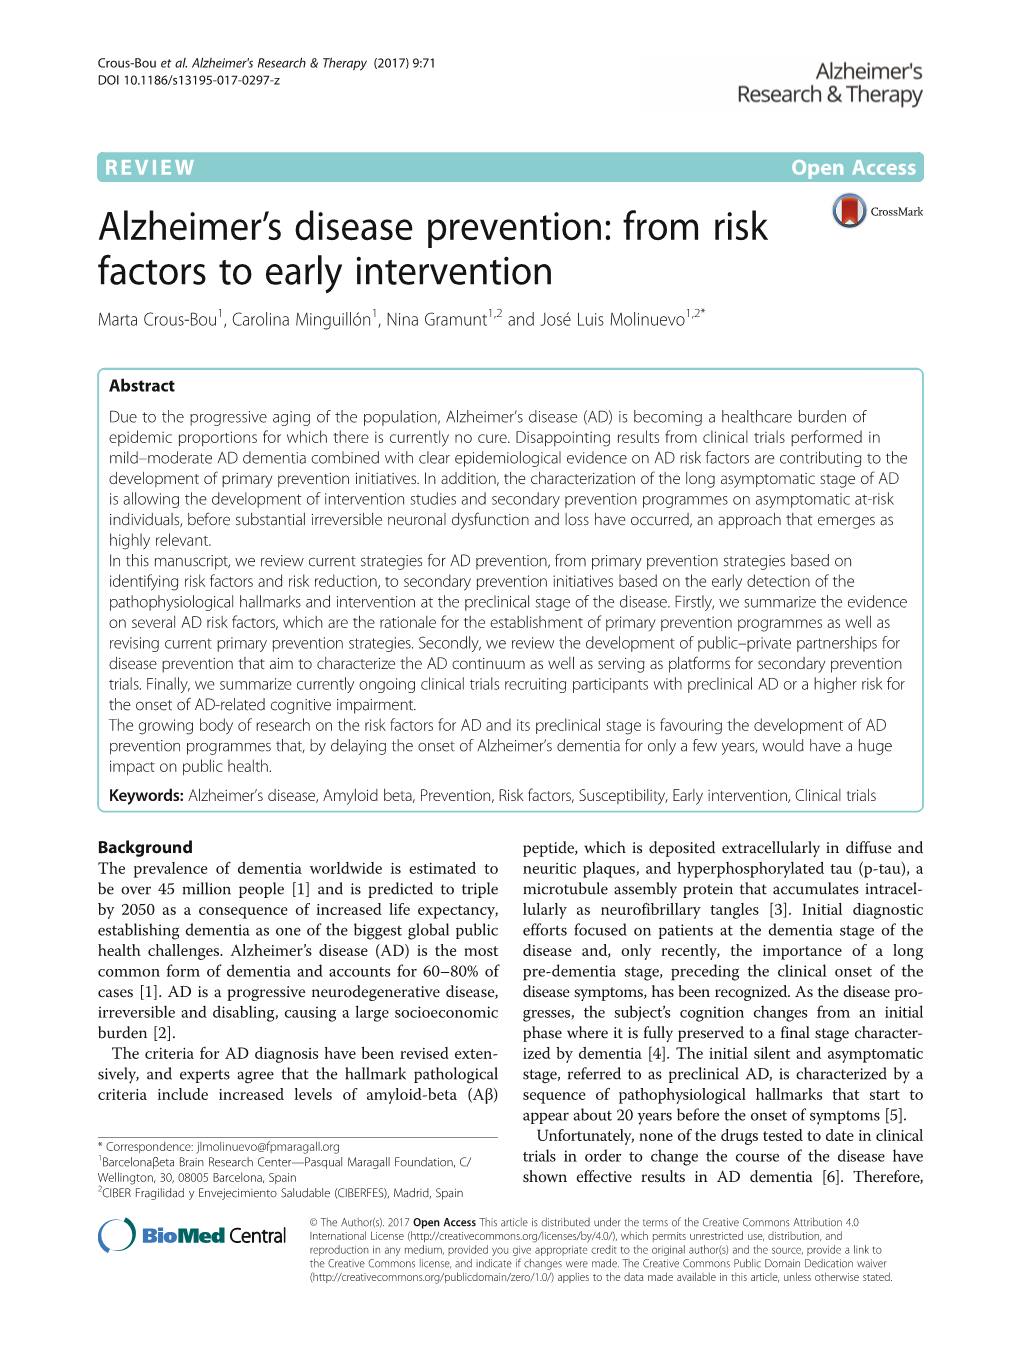 Alzheimer's Disease Prevention: from Risk Factors to Early Intervention